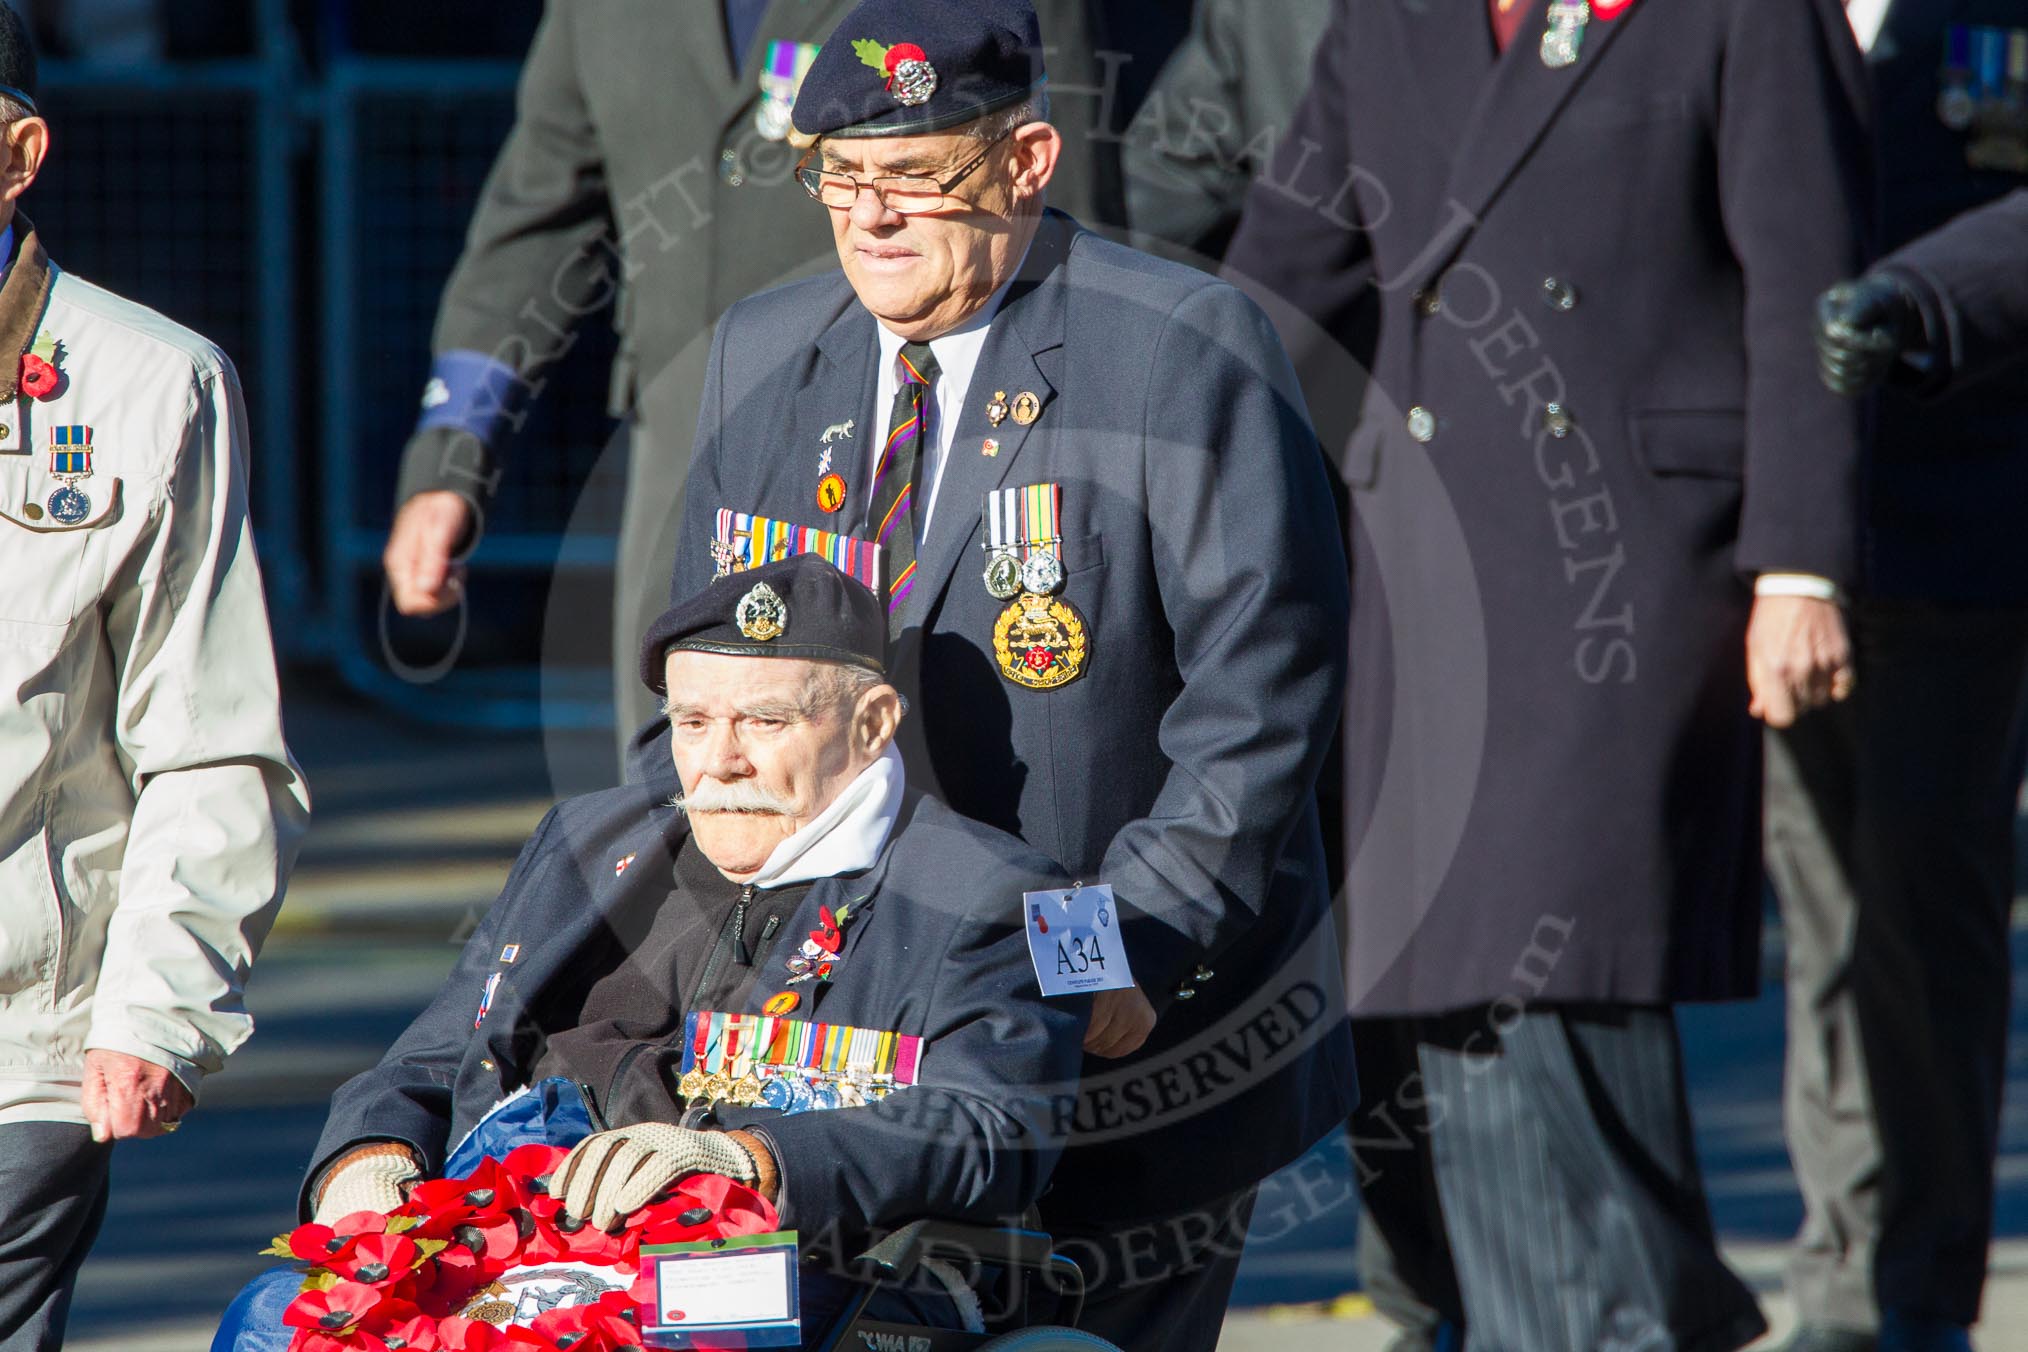 Remembrance Sunday Cenotaph March Past 2013: A34 -Royal Hampshire Regiment Comrades Association..
Press stand opposite the Foreign Office building, Whitehall, London SW1,
London,
Greater London,
United Kingdom,
on 10 November 2013 at 11:58, image #1302